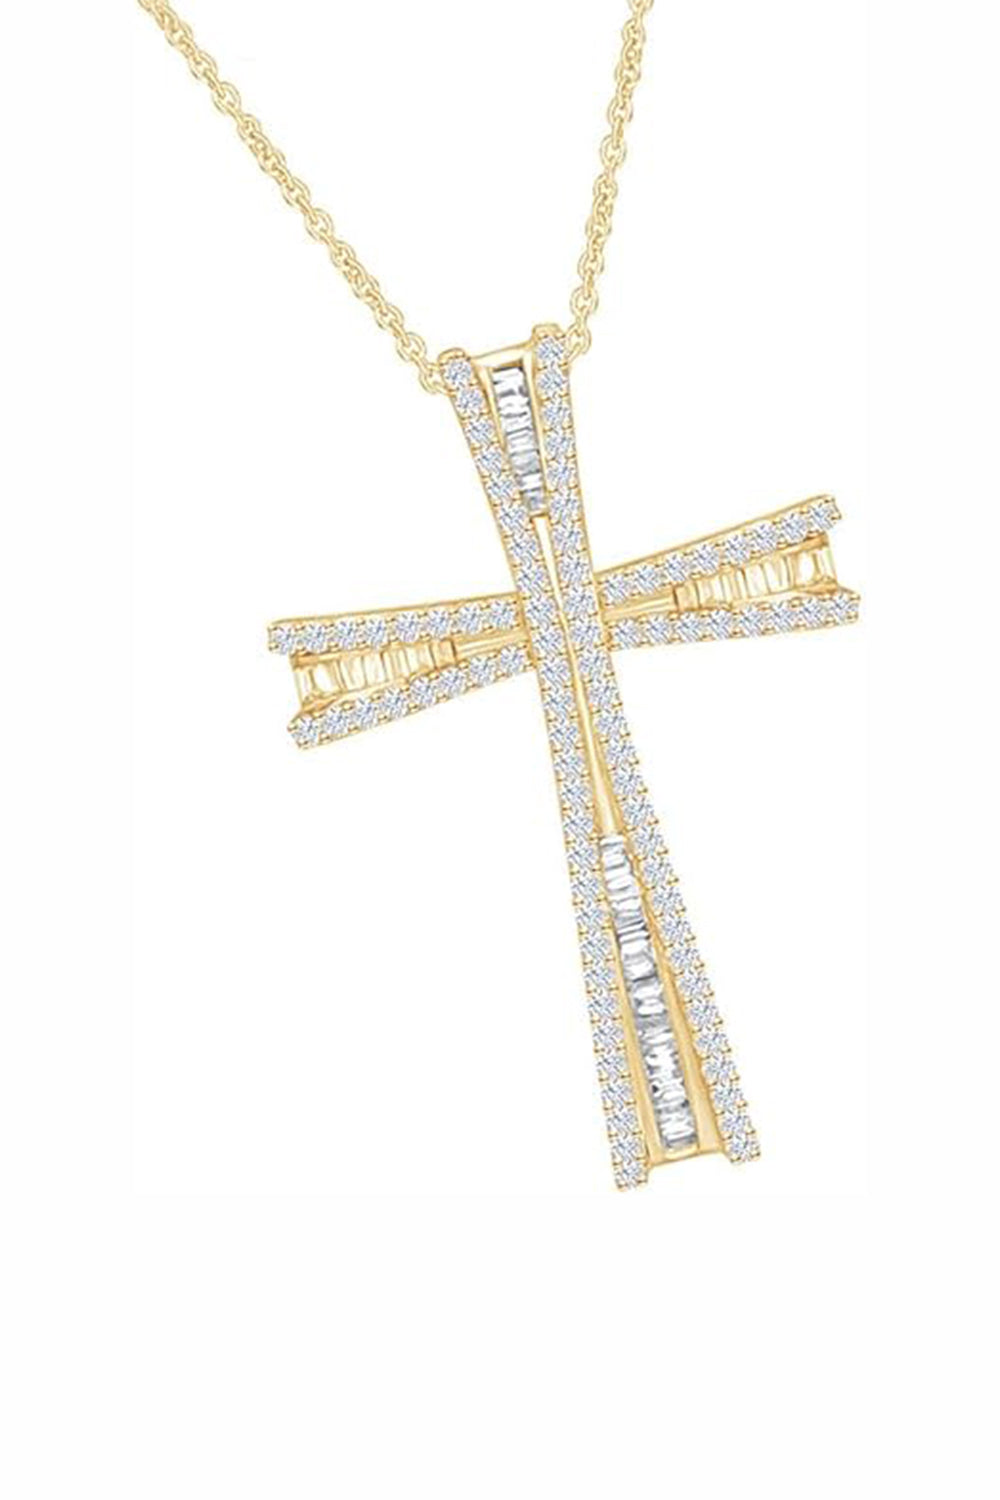 Yellow Gold Color Flared Cross Pendant Necklace, Cross Necklace Religious